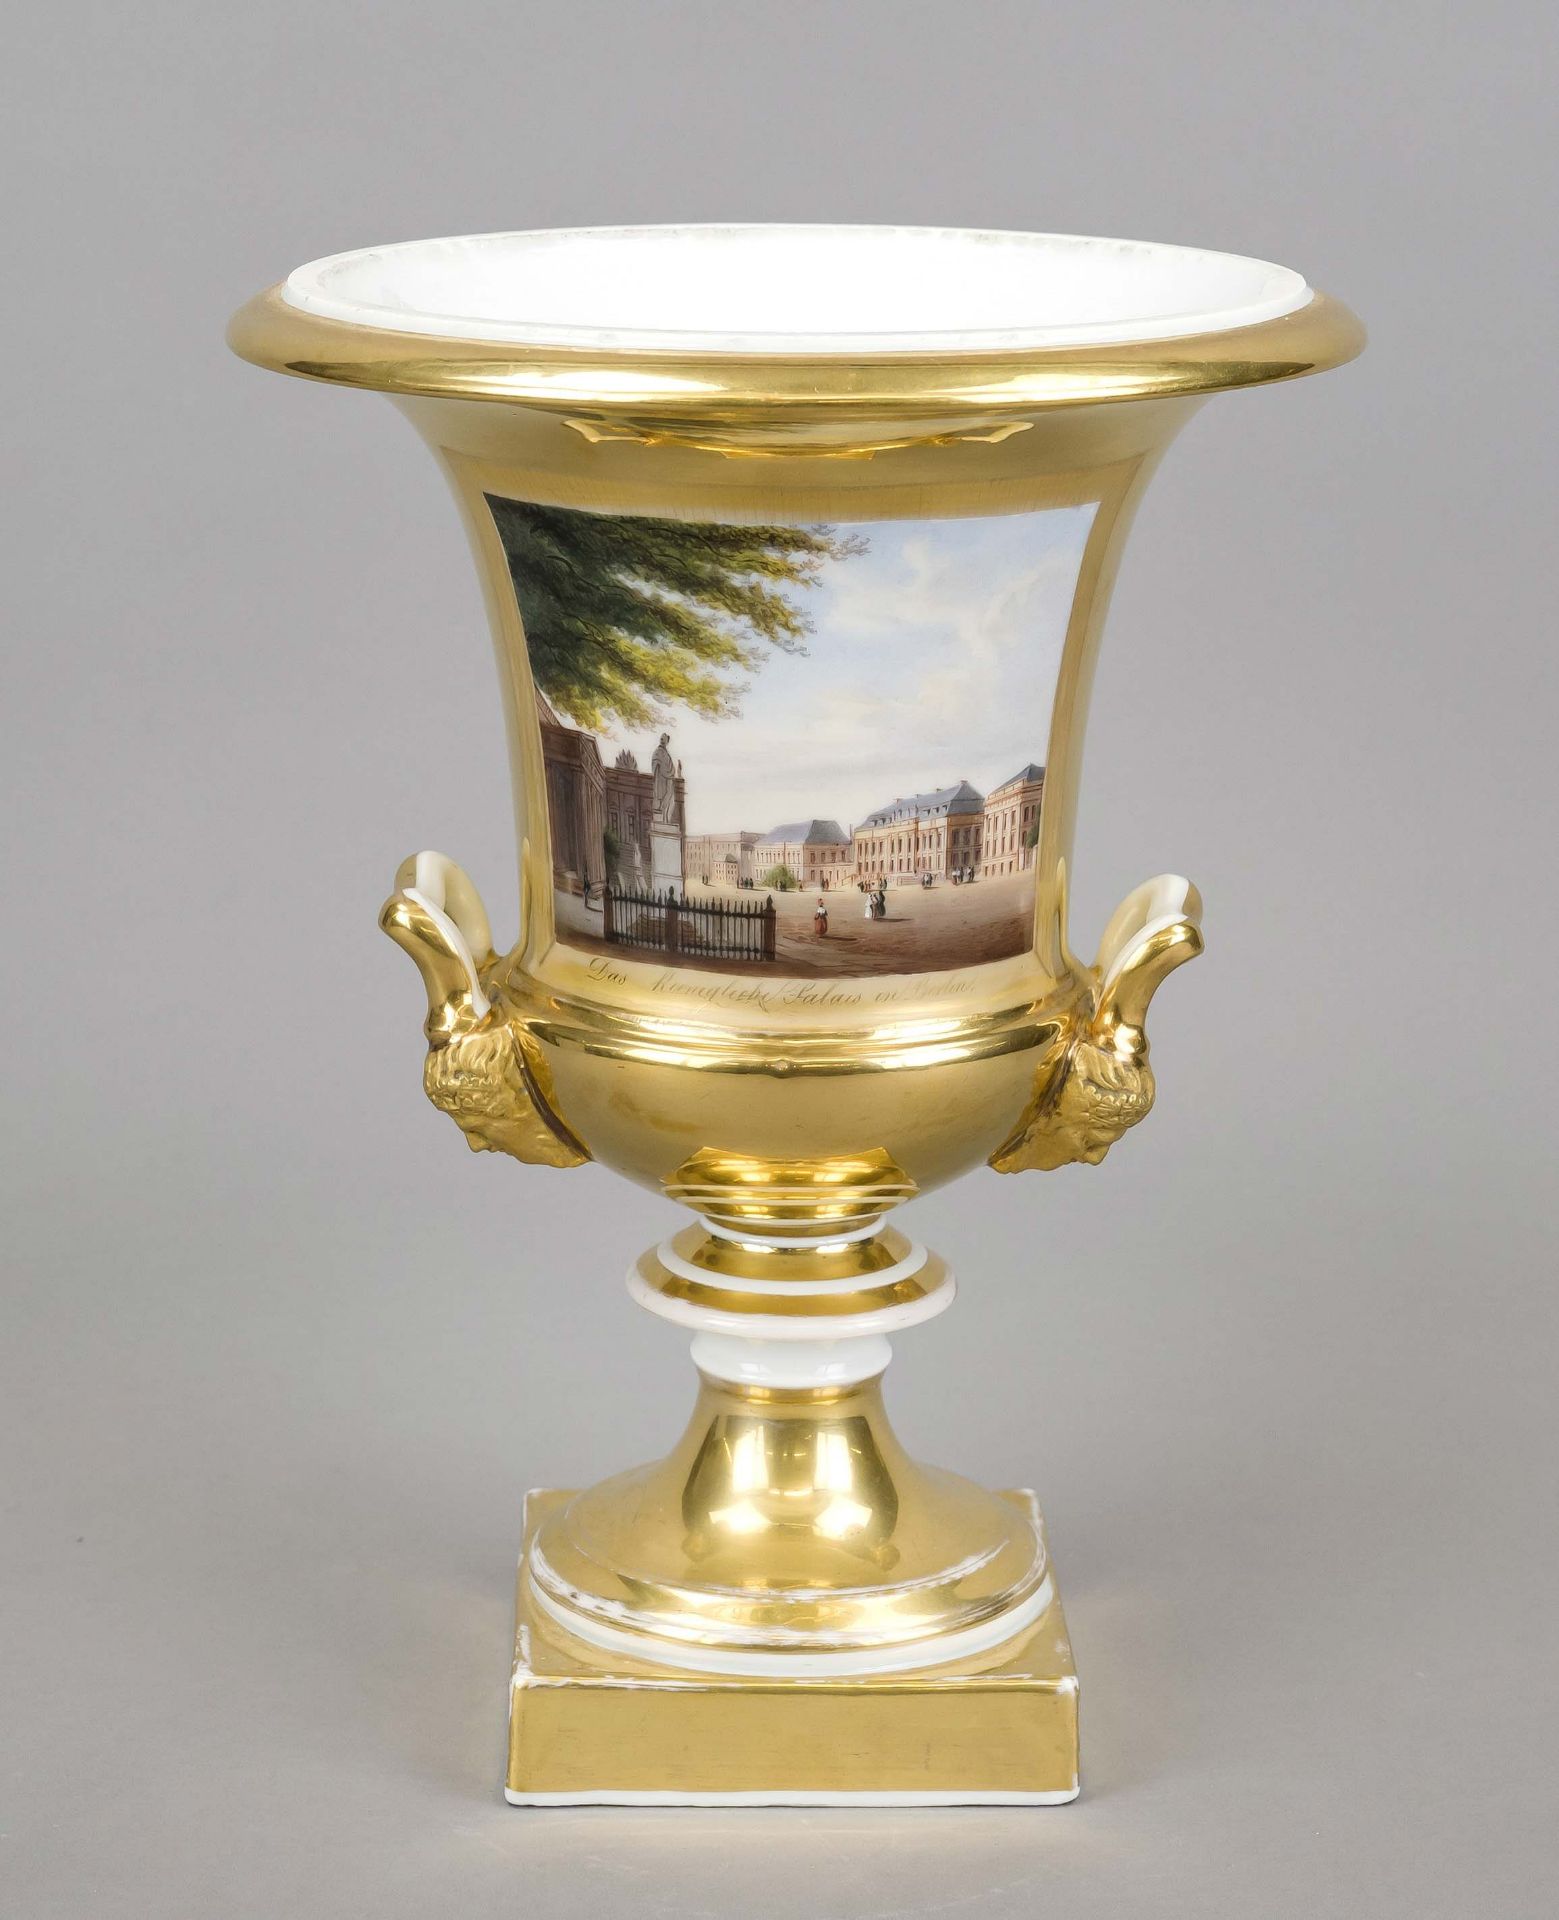 Crater vase ''The Royal Palace in Berlin'', 1st half 19th century, w. Thuringia, crater body with